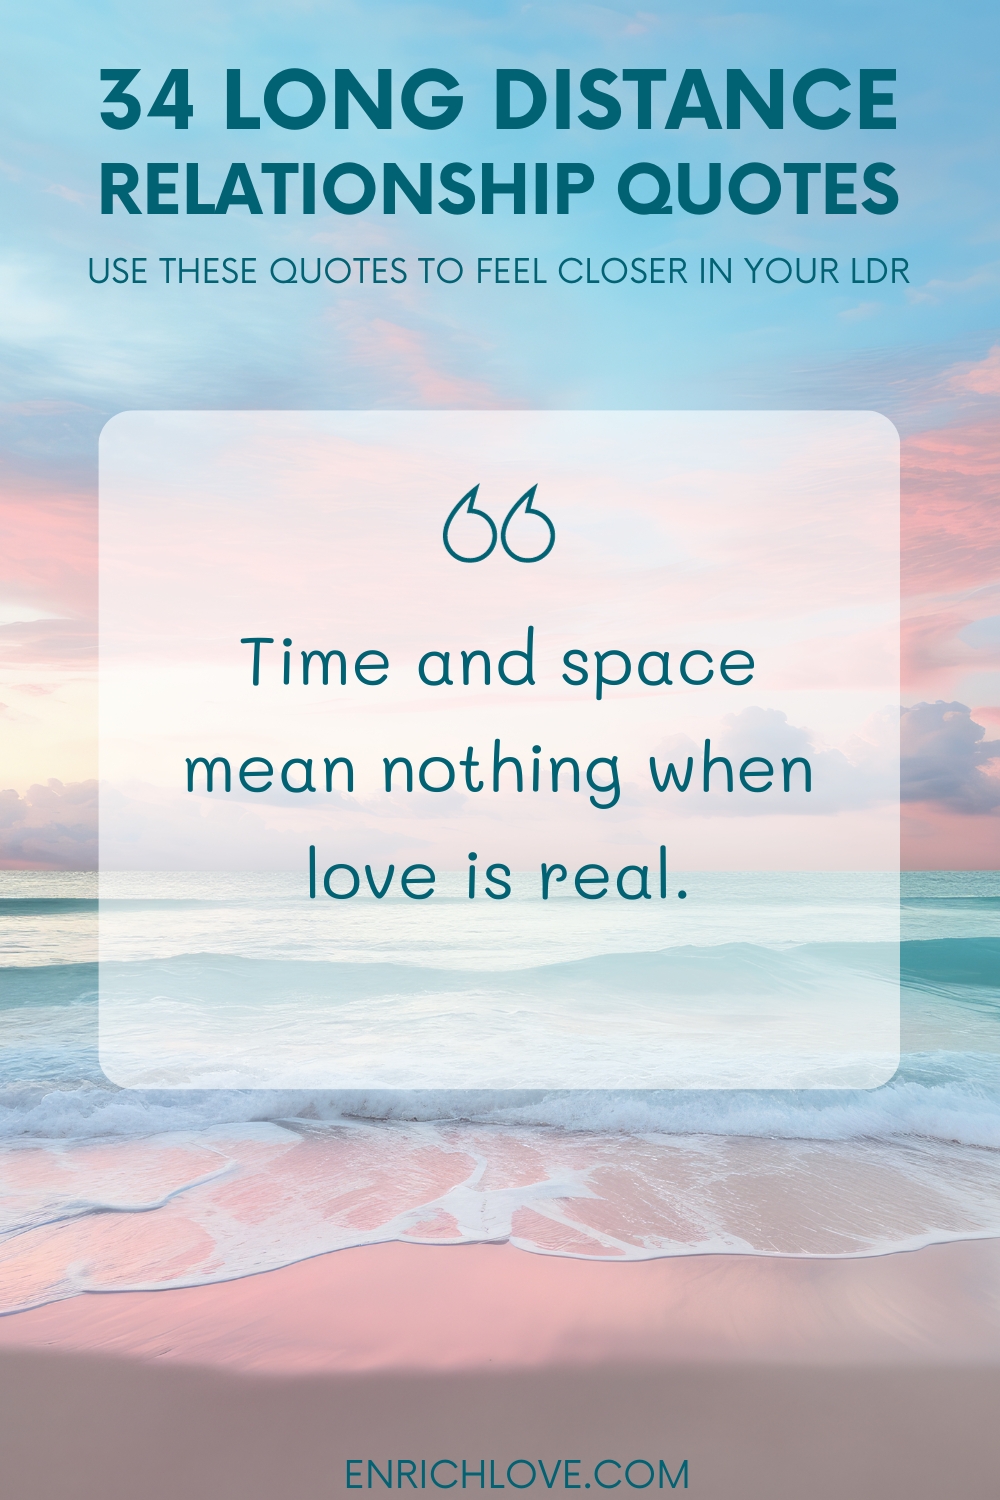 34 Long Distance Relationship Quotes - Time and space mean nothing when love is real.